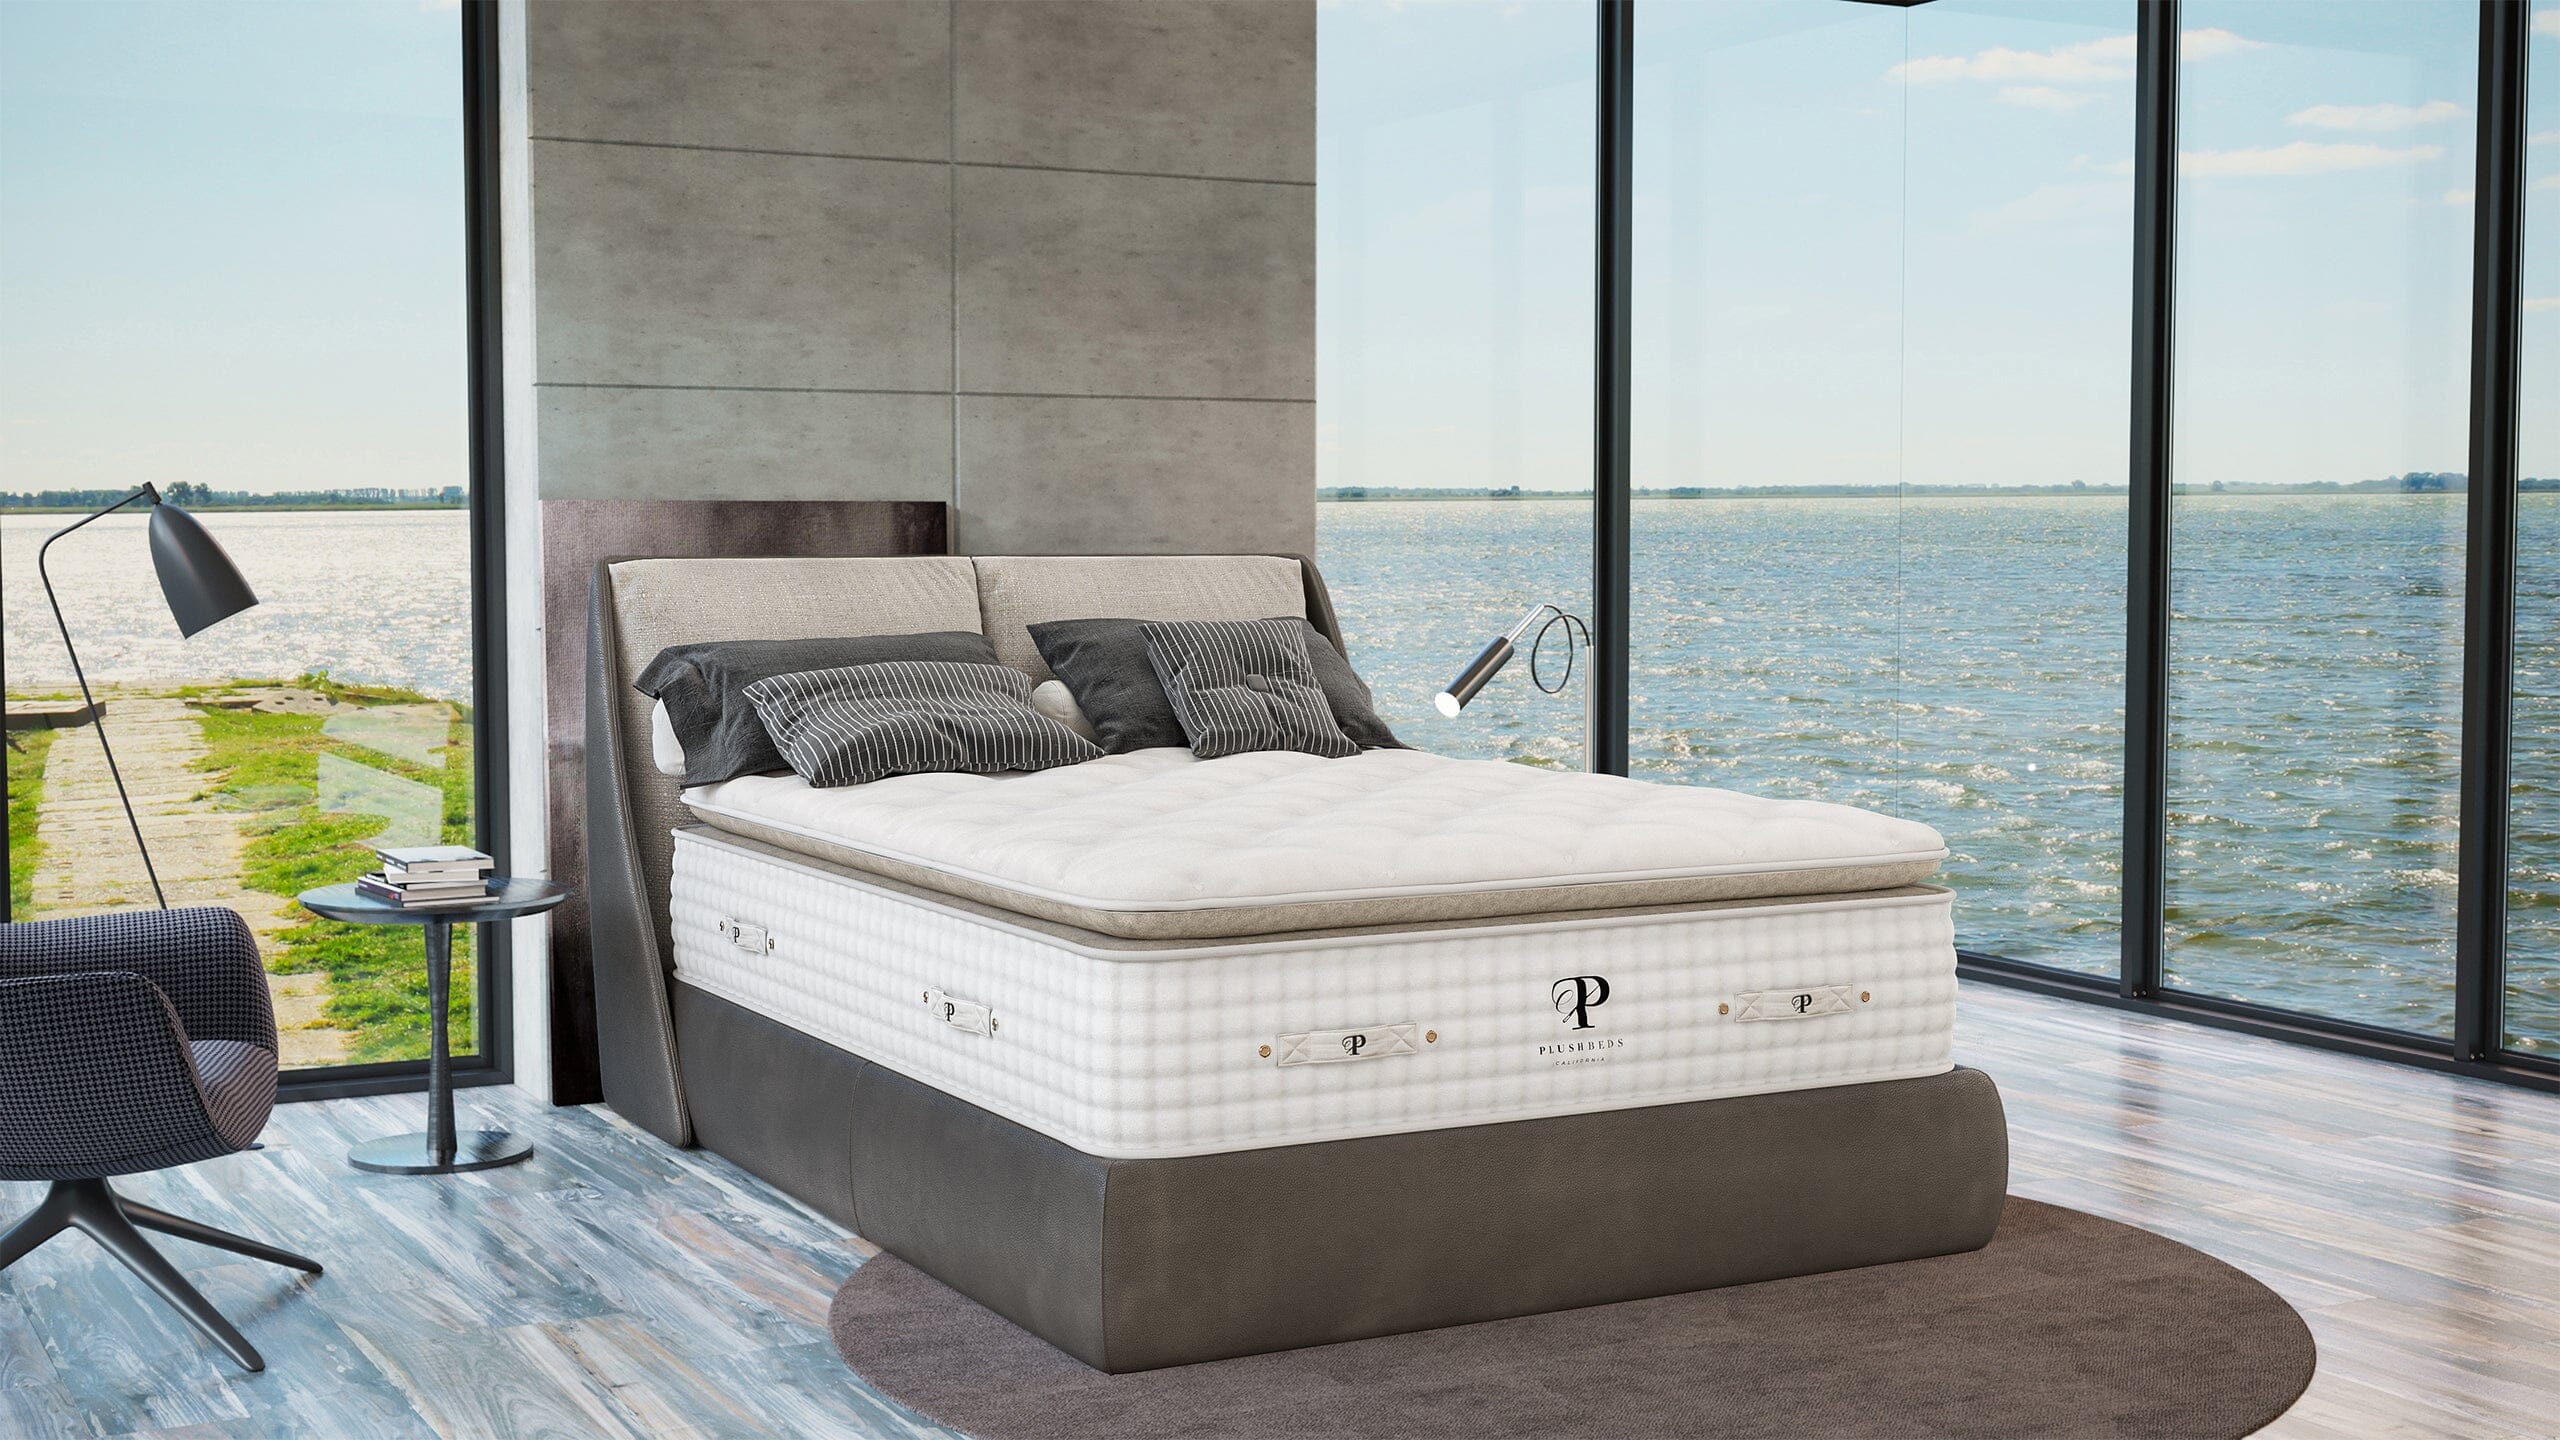 Differentiate between King and Queen Mattress, Which one is the best?